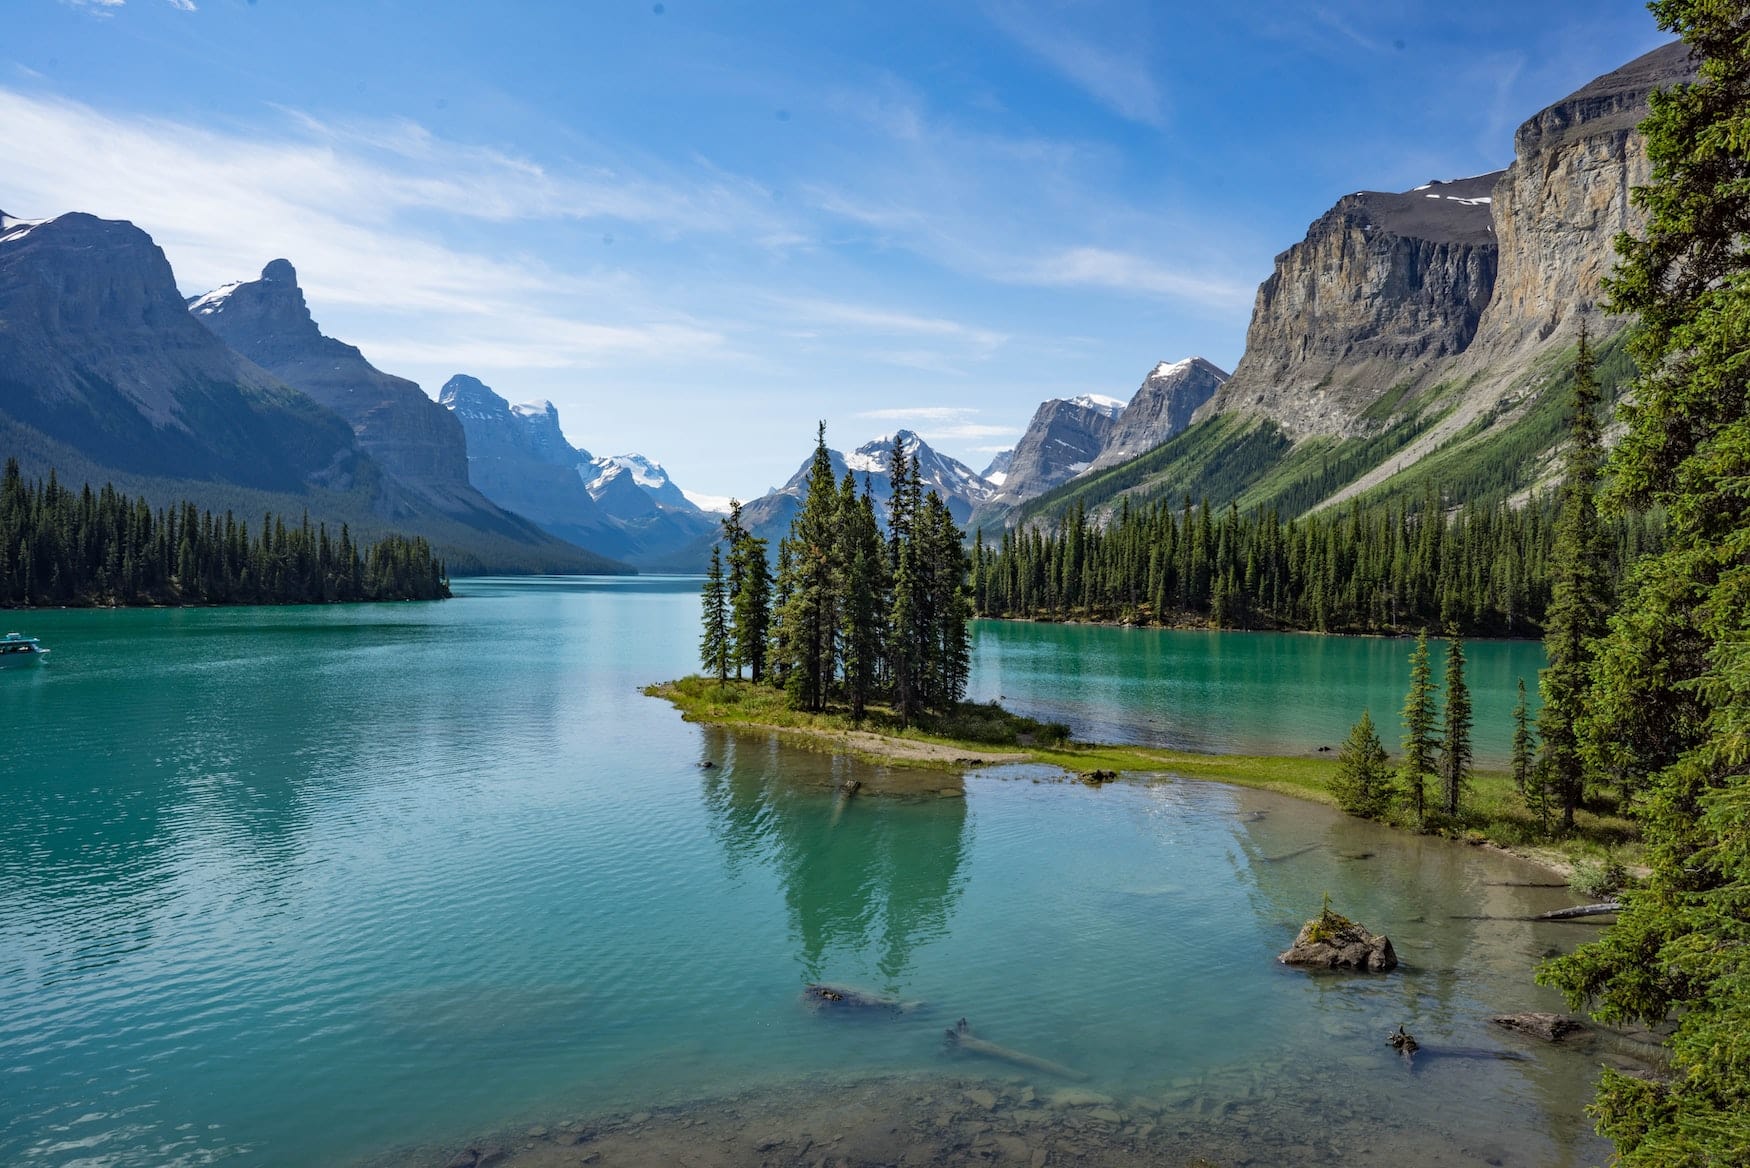 Spirit Island in Jasper National Park, one of Canada's most beautiful national parks